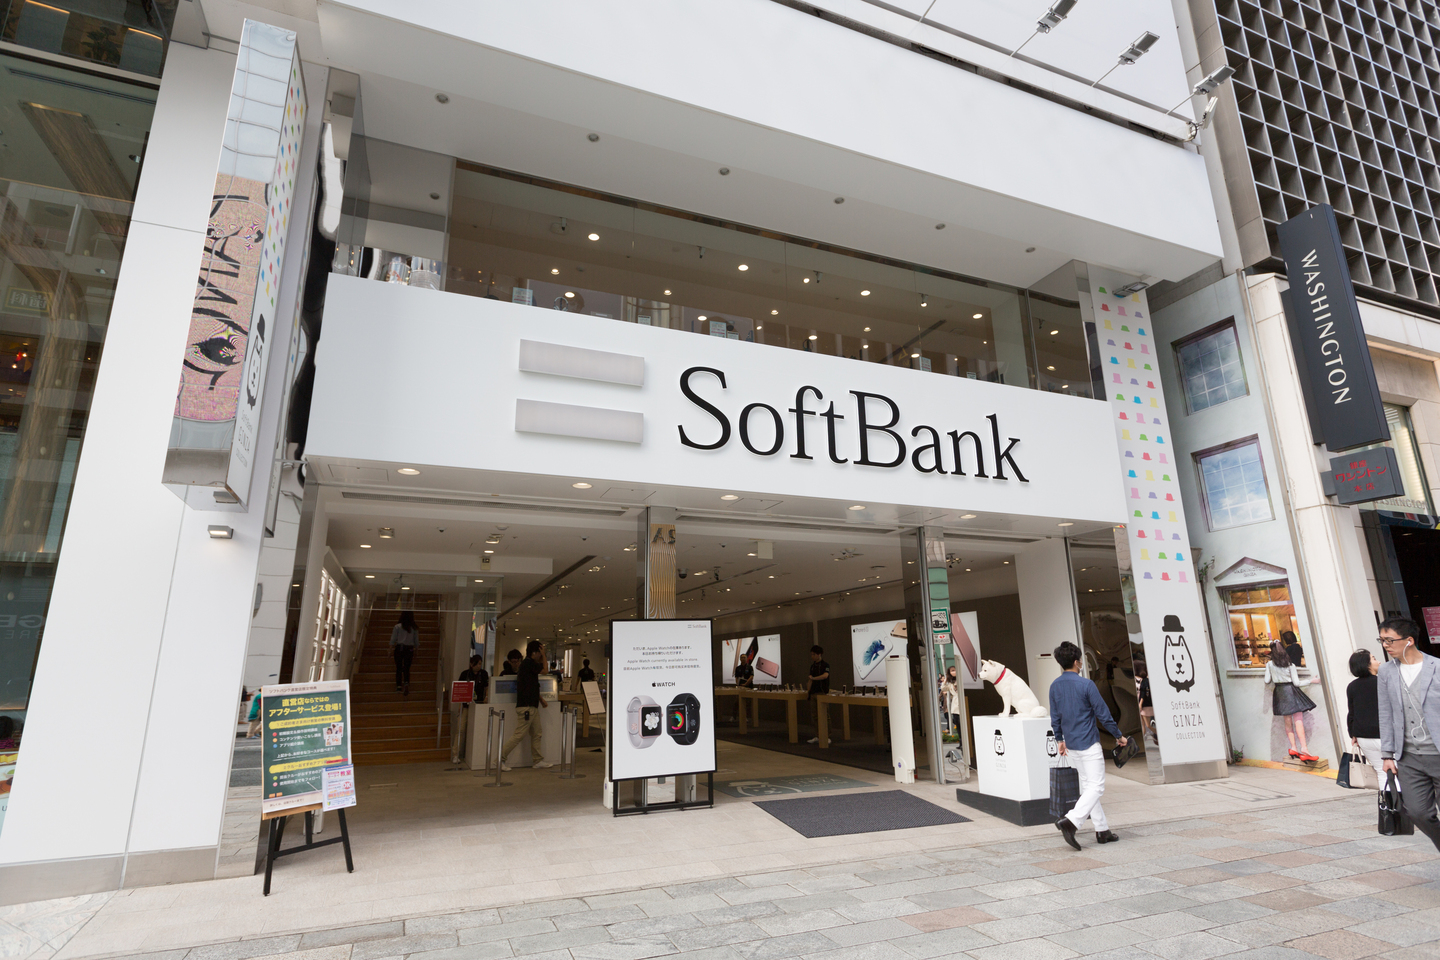 Can ARM’s IPO Revive Softbank's “VISION” and Save Its Founder, Financially ? 安謀上市救軟銀， 以及創辦人?